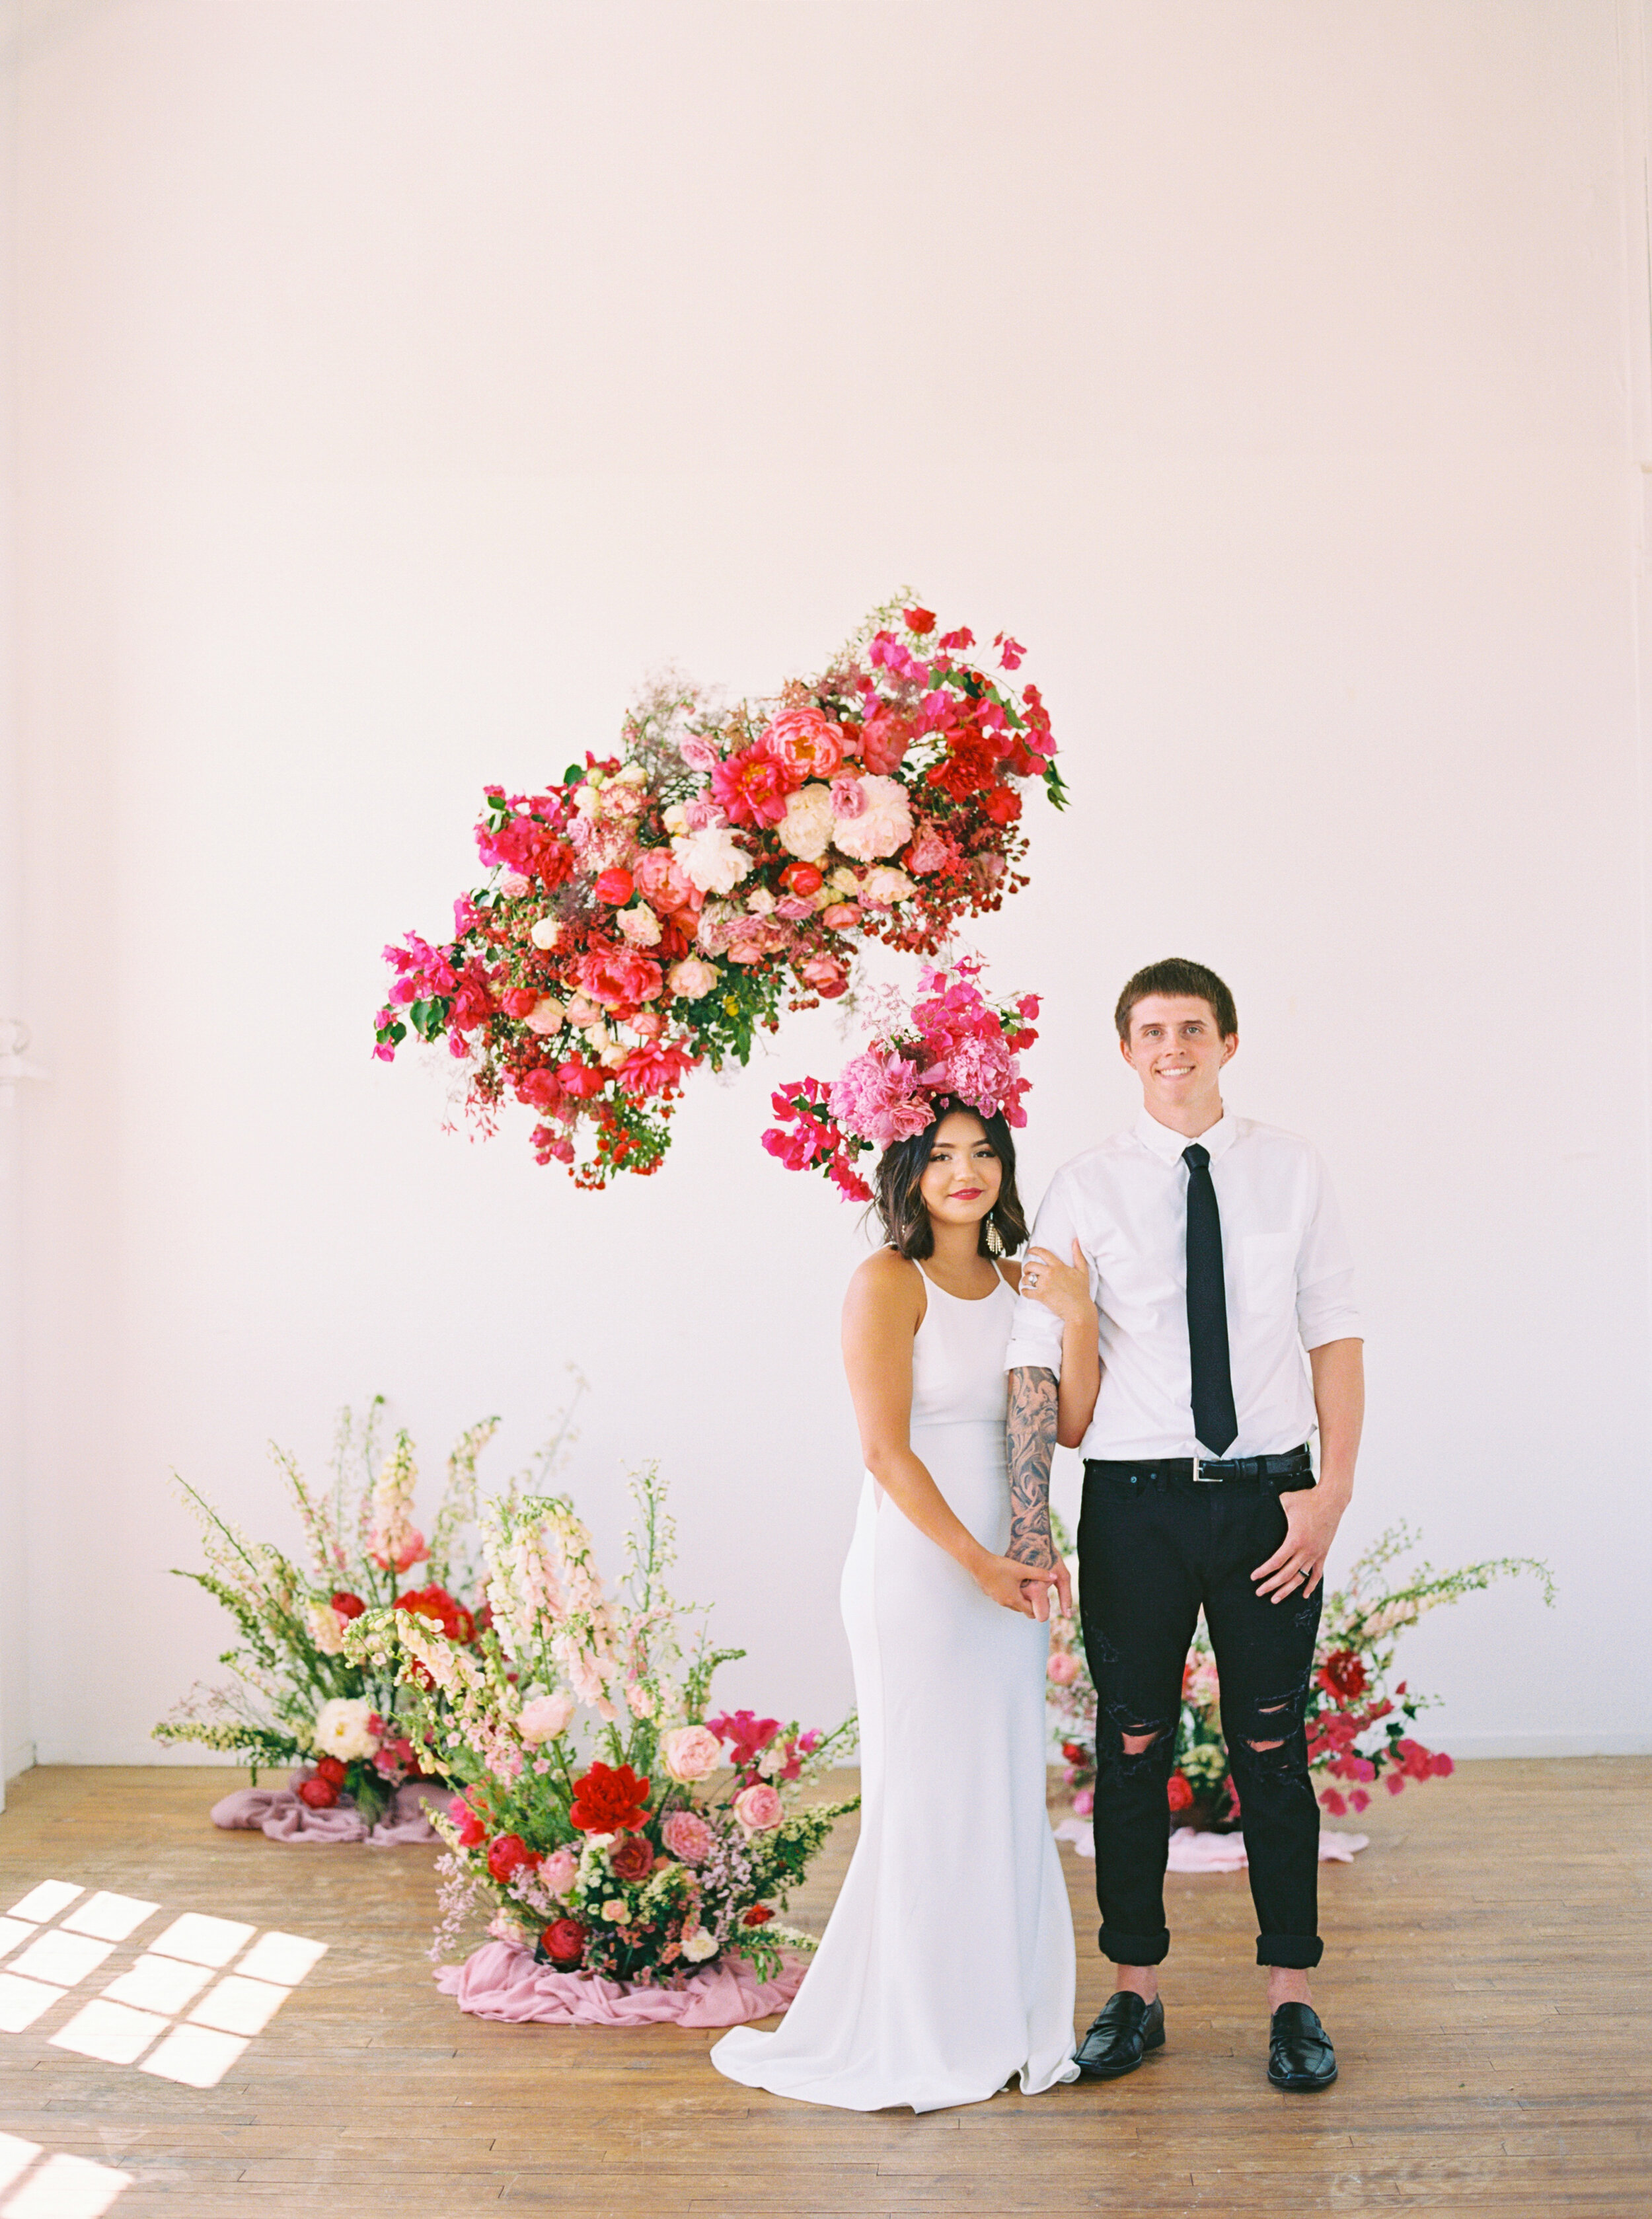 A Romantic Wedding Elopement Filled with Colorful Fuchsia - Sarahi Hadden Submission-63.jpg